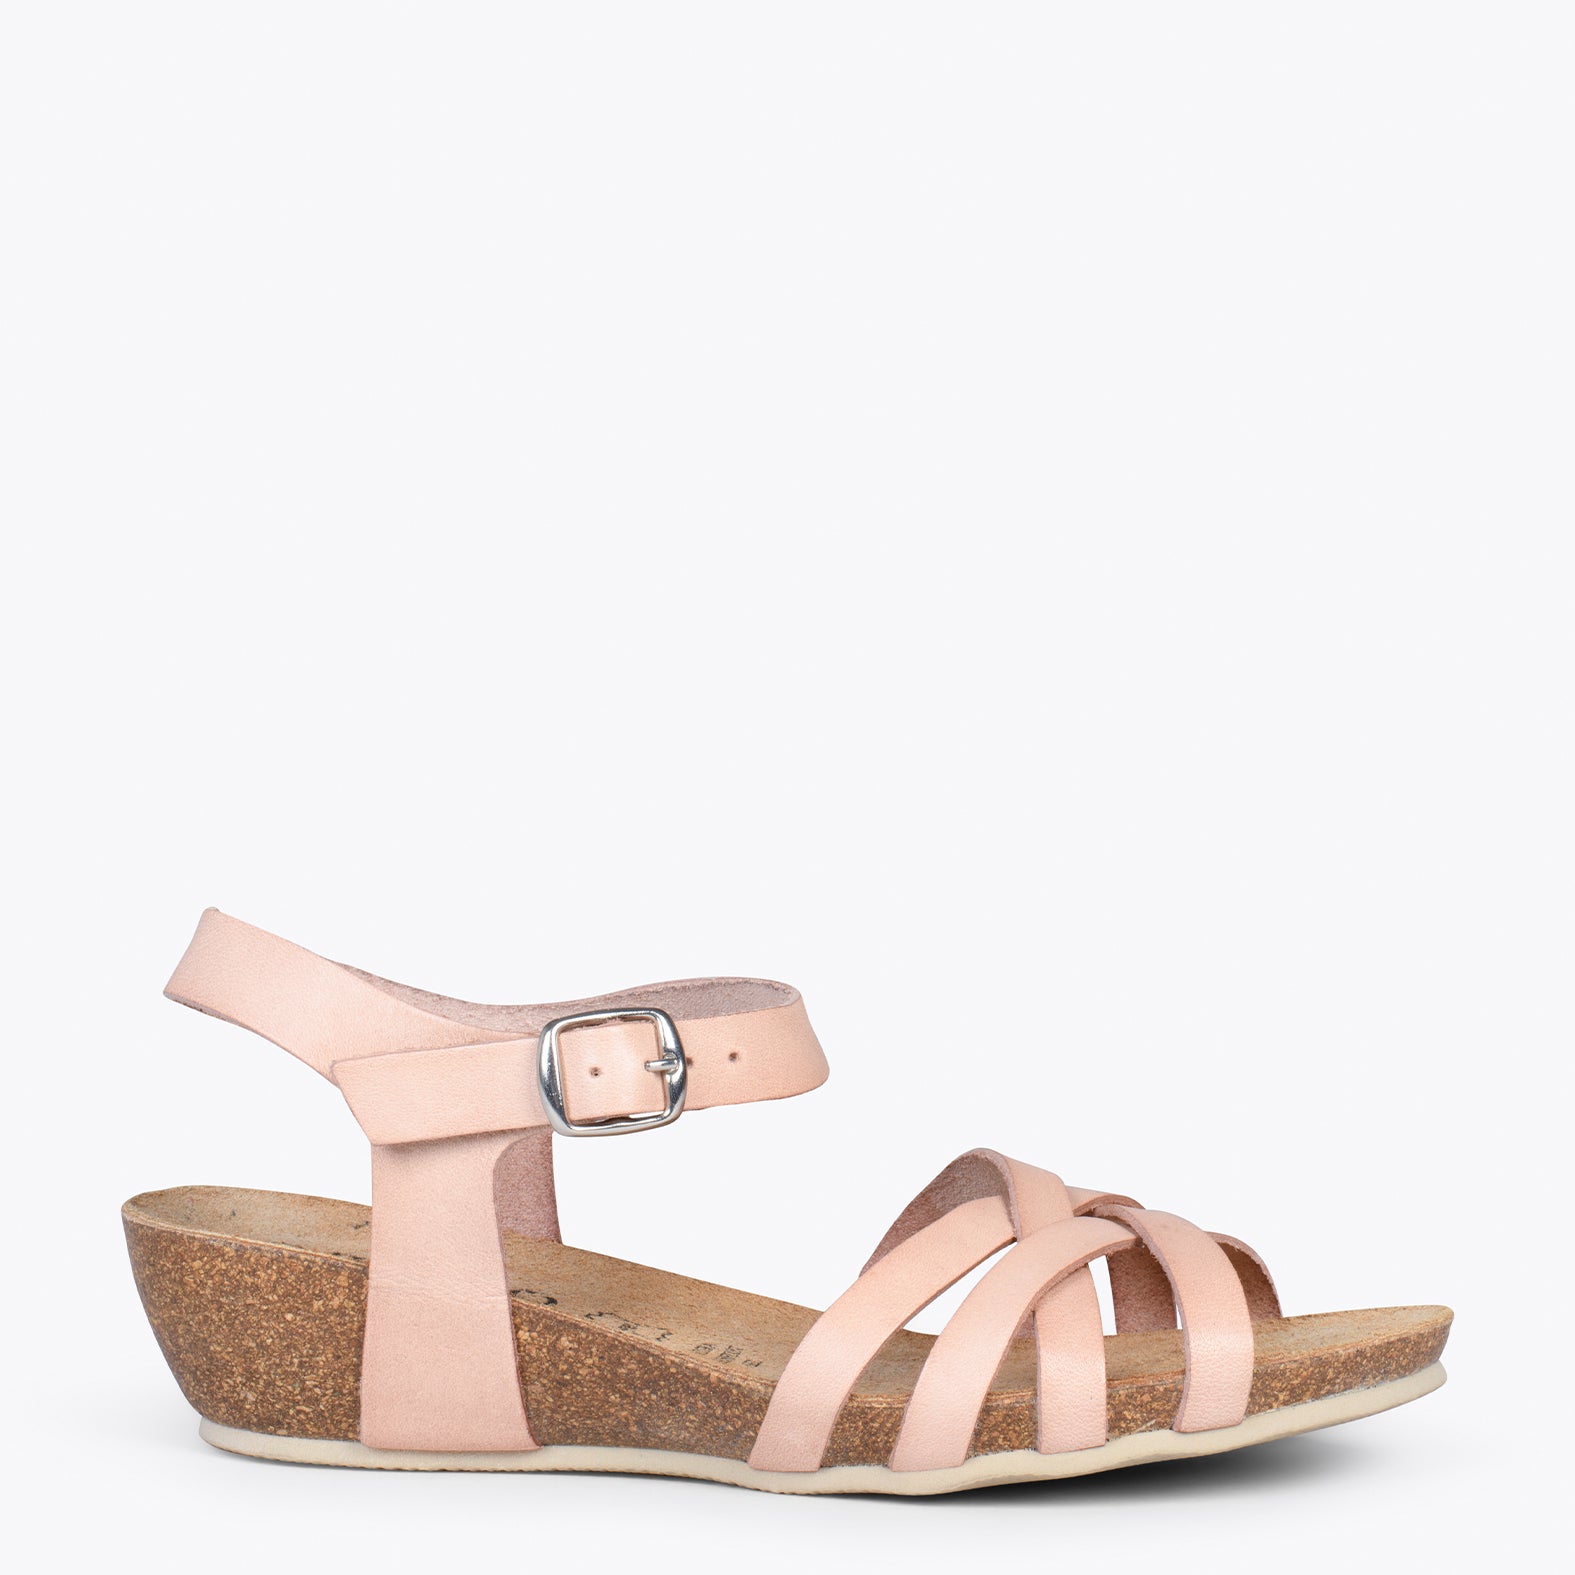 HANAE – NUDE BIO flat sandals with straps